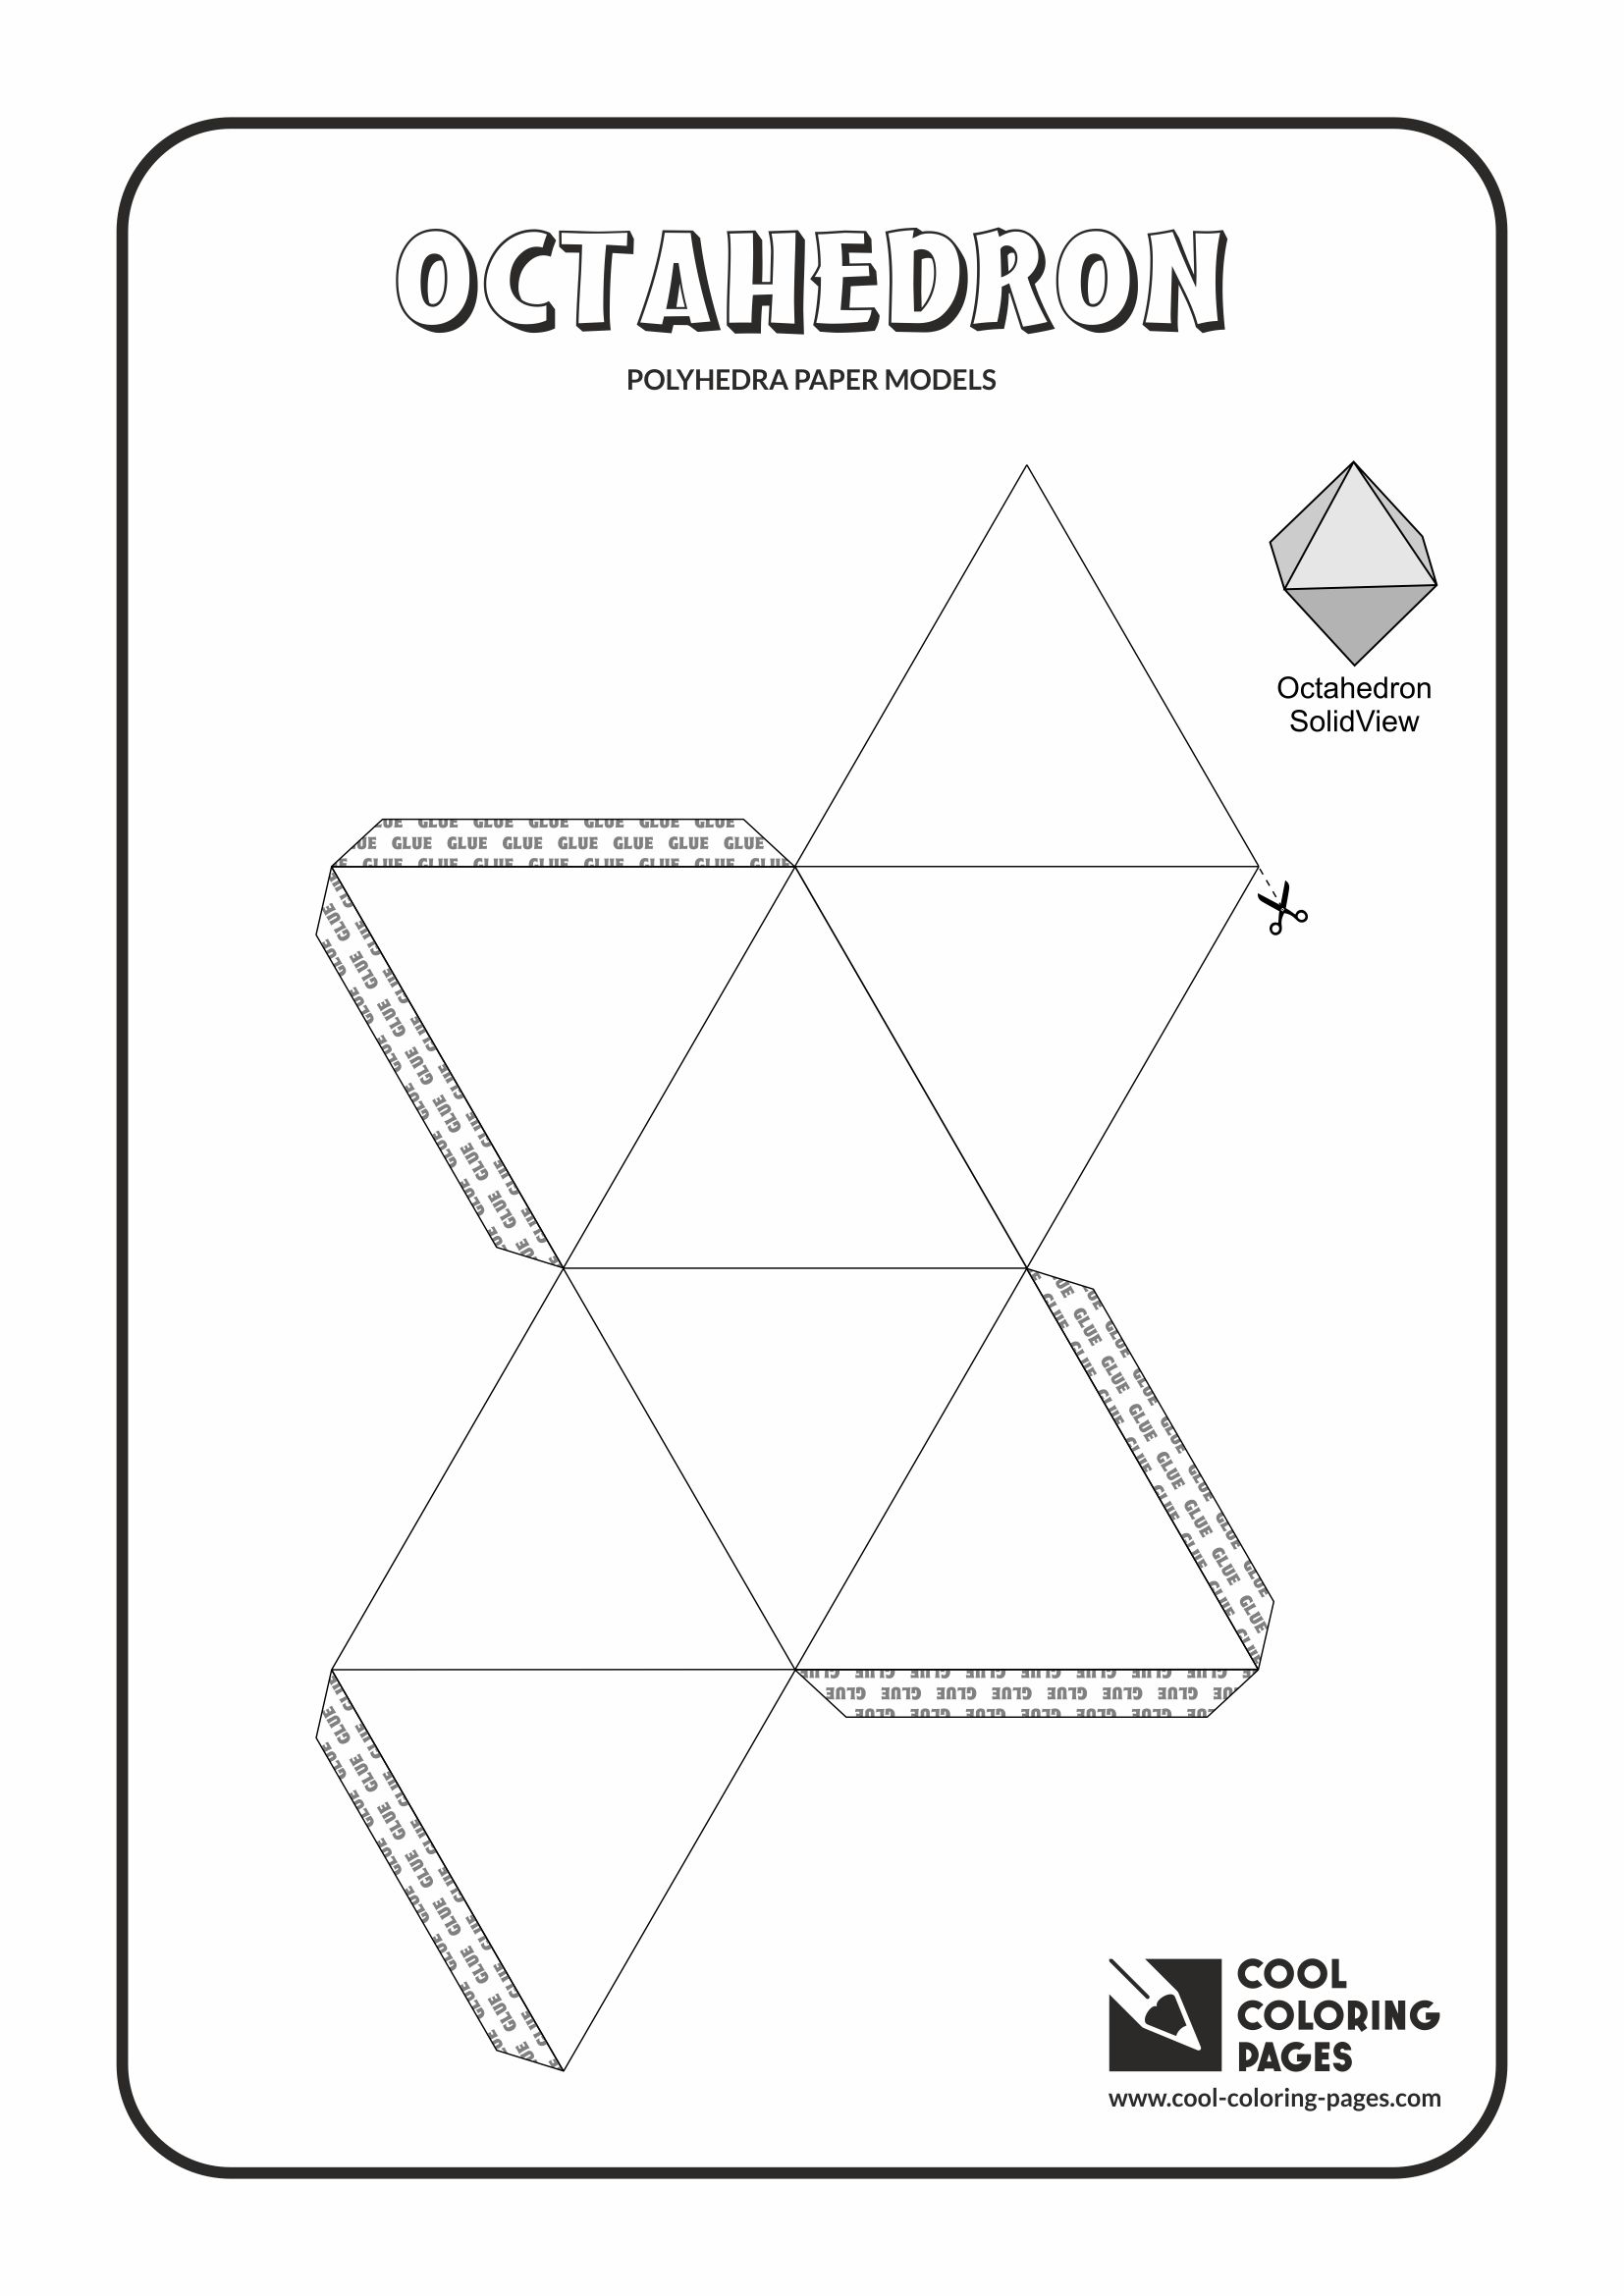 Cool Coloring Pages - Paper models of polyhedra / Paper solids models / Octahedron